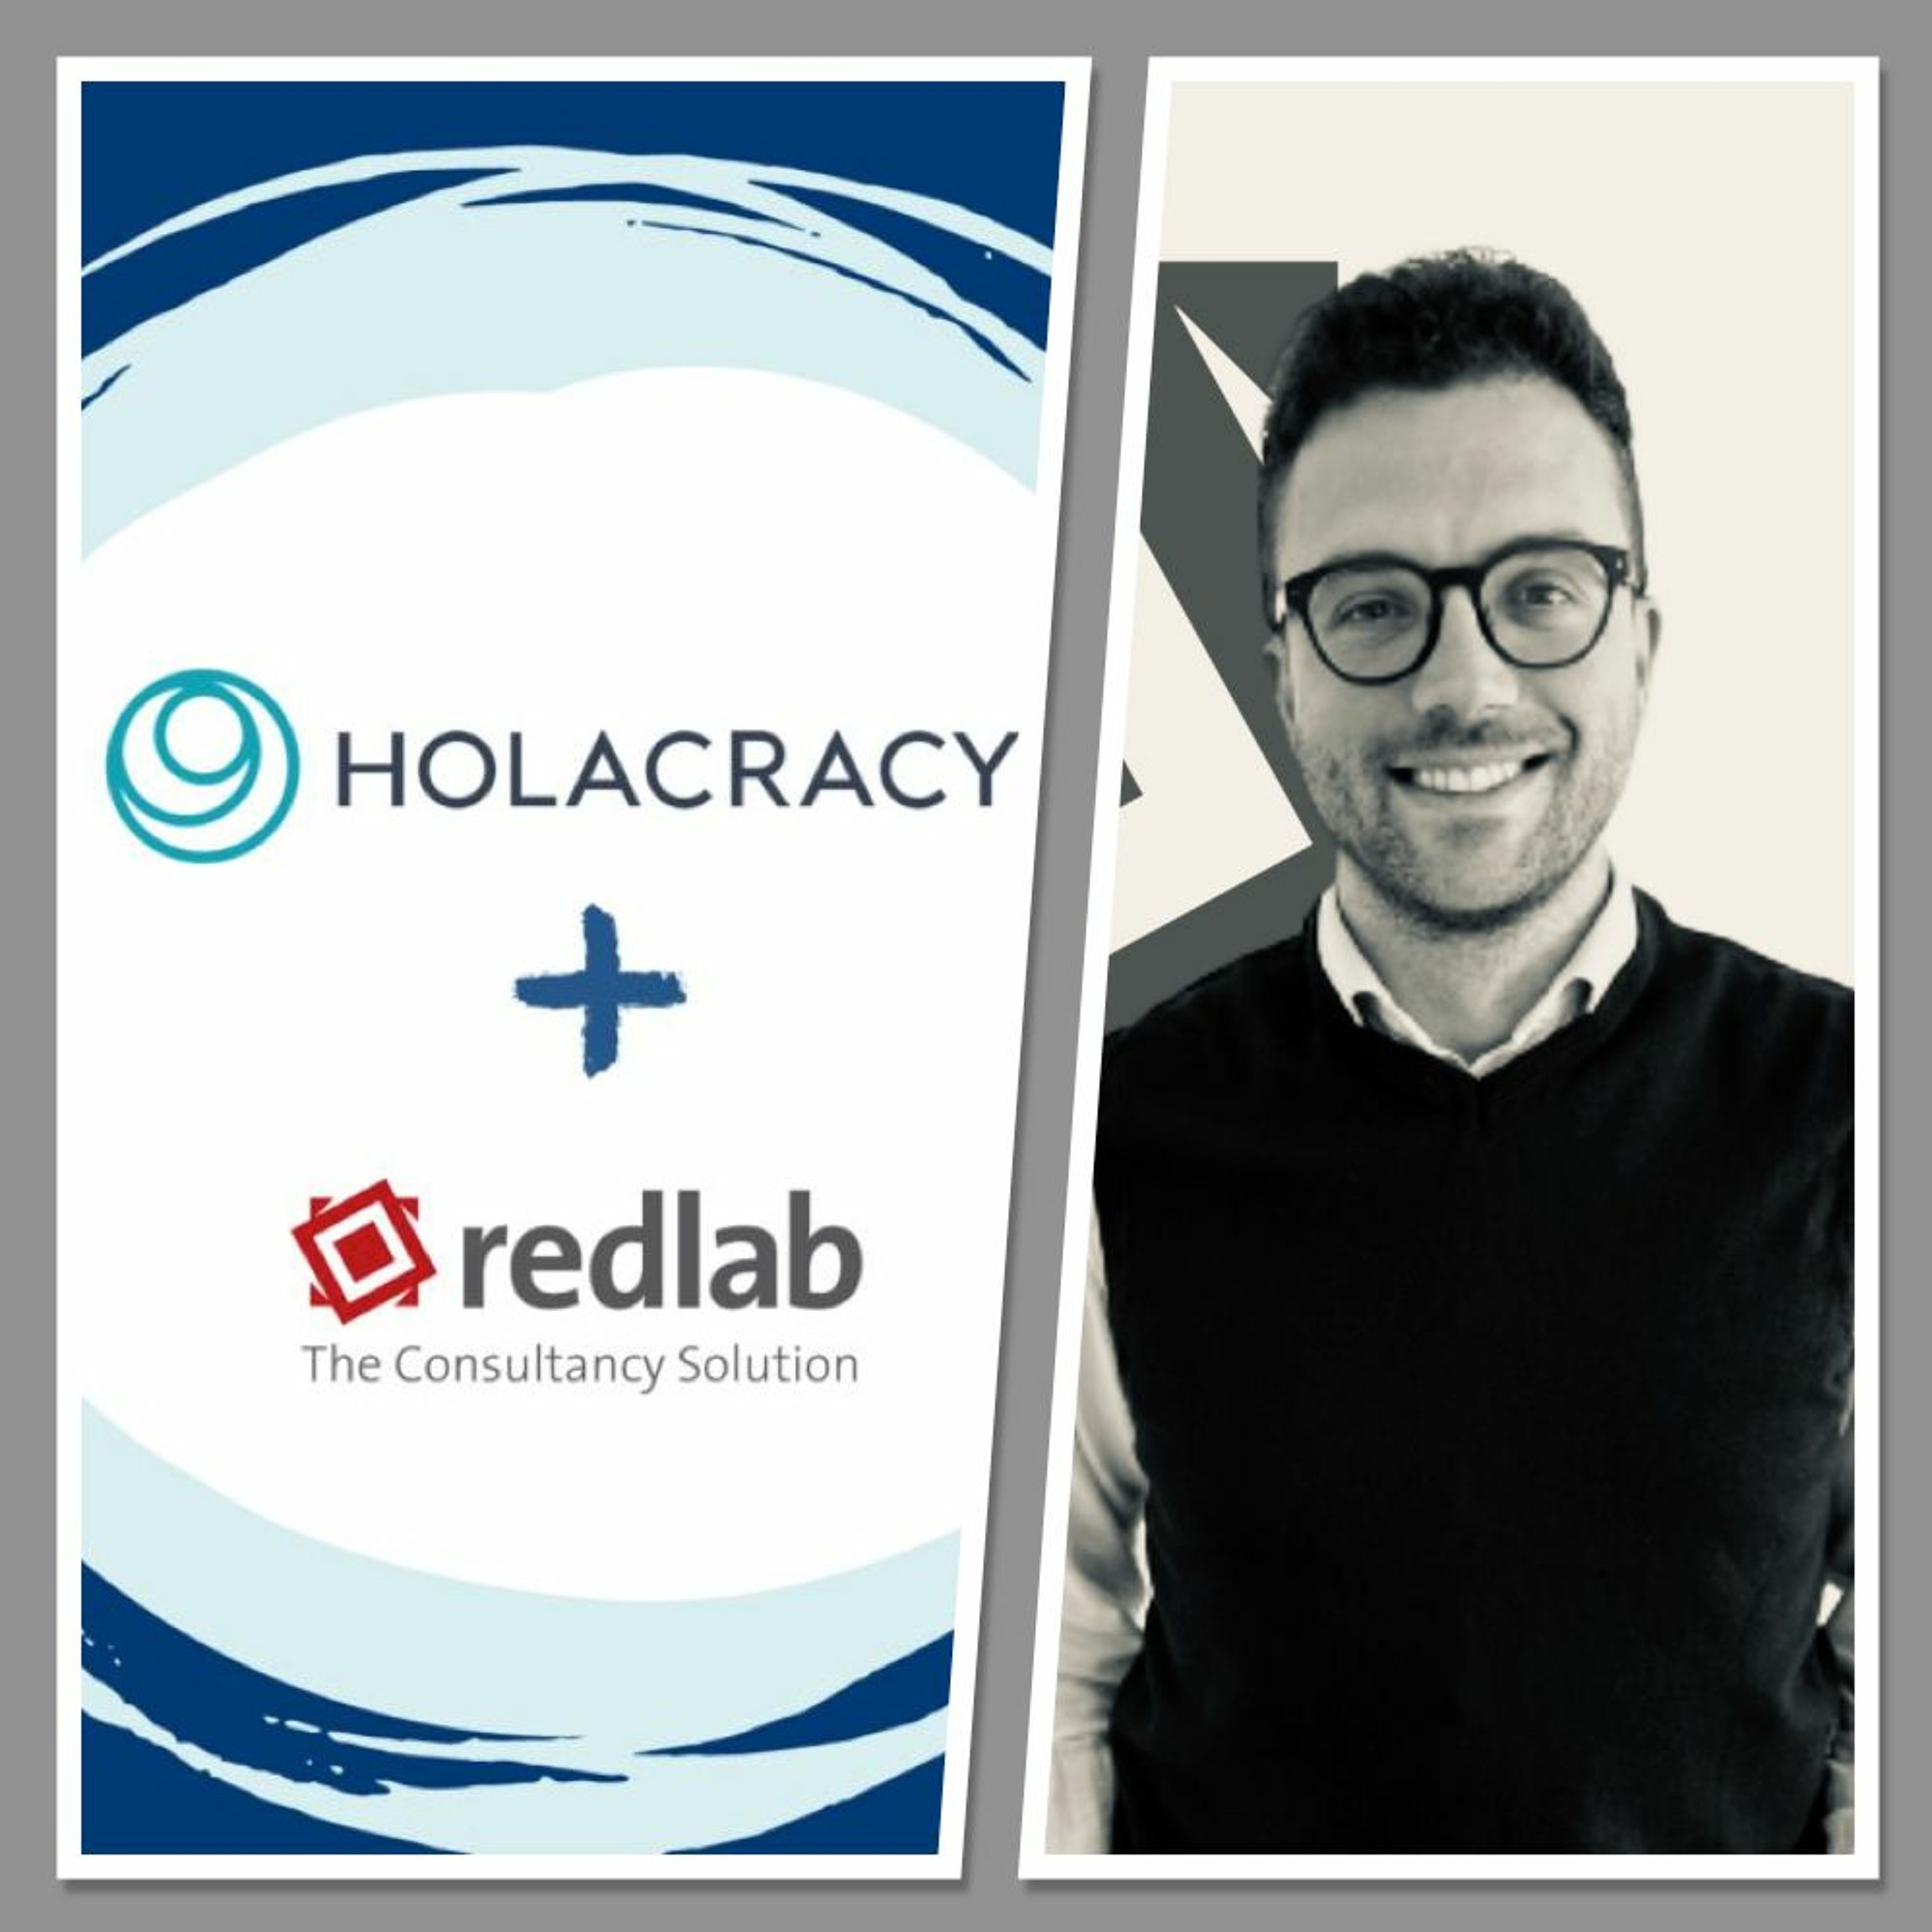 Marco Scarpellino: Holacracy is really simple !